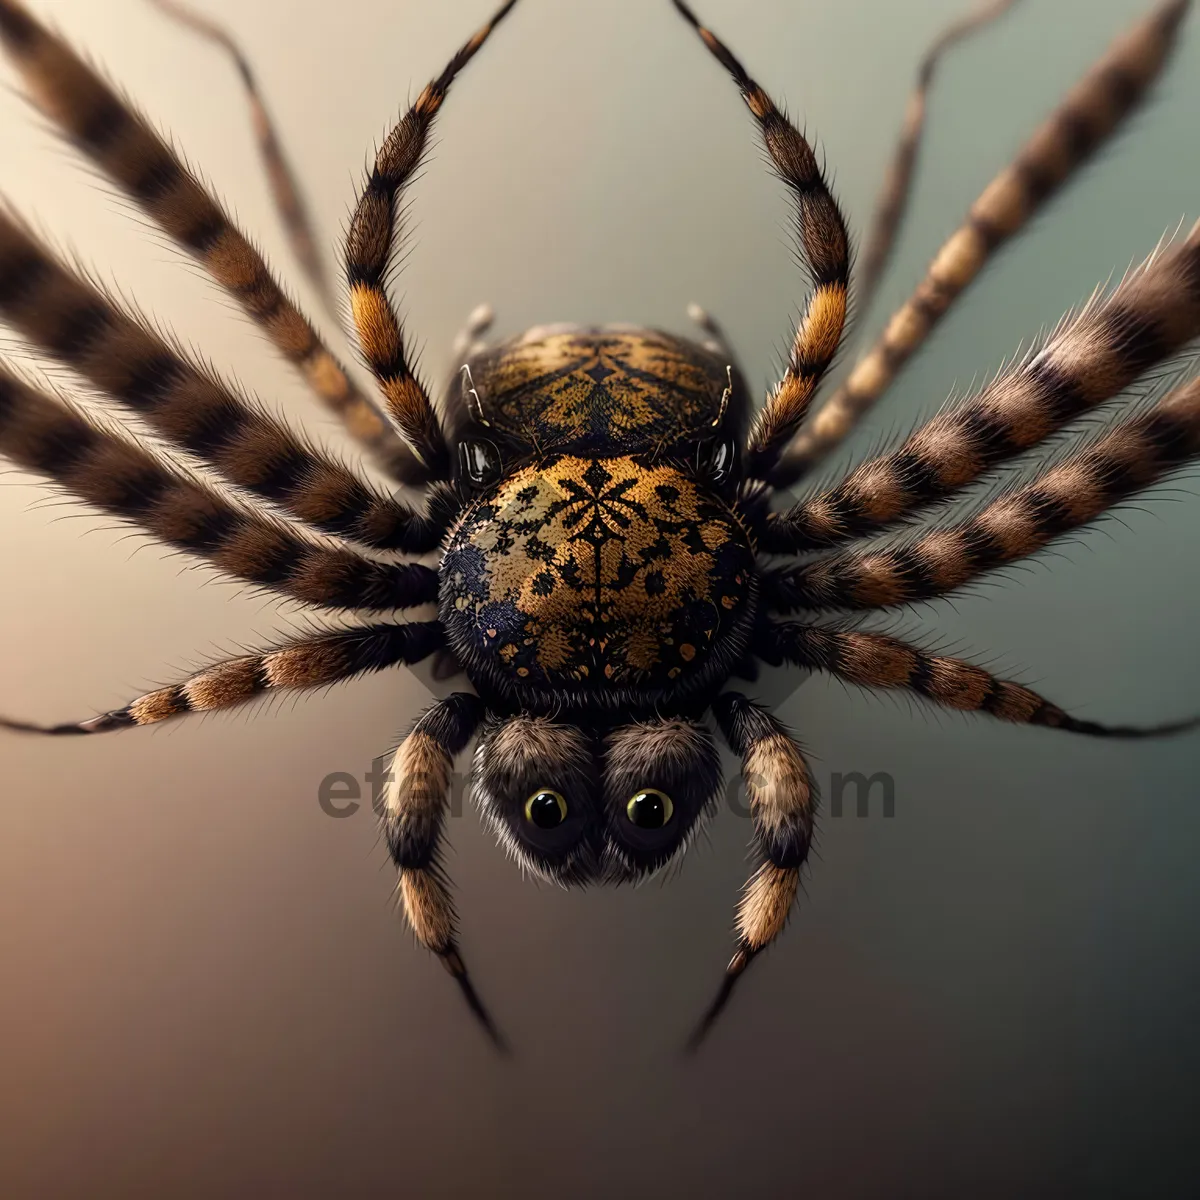 Picture of Black and Gold Garden Spider: Captivating Arachnid in the Garden